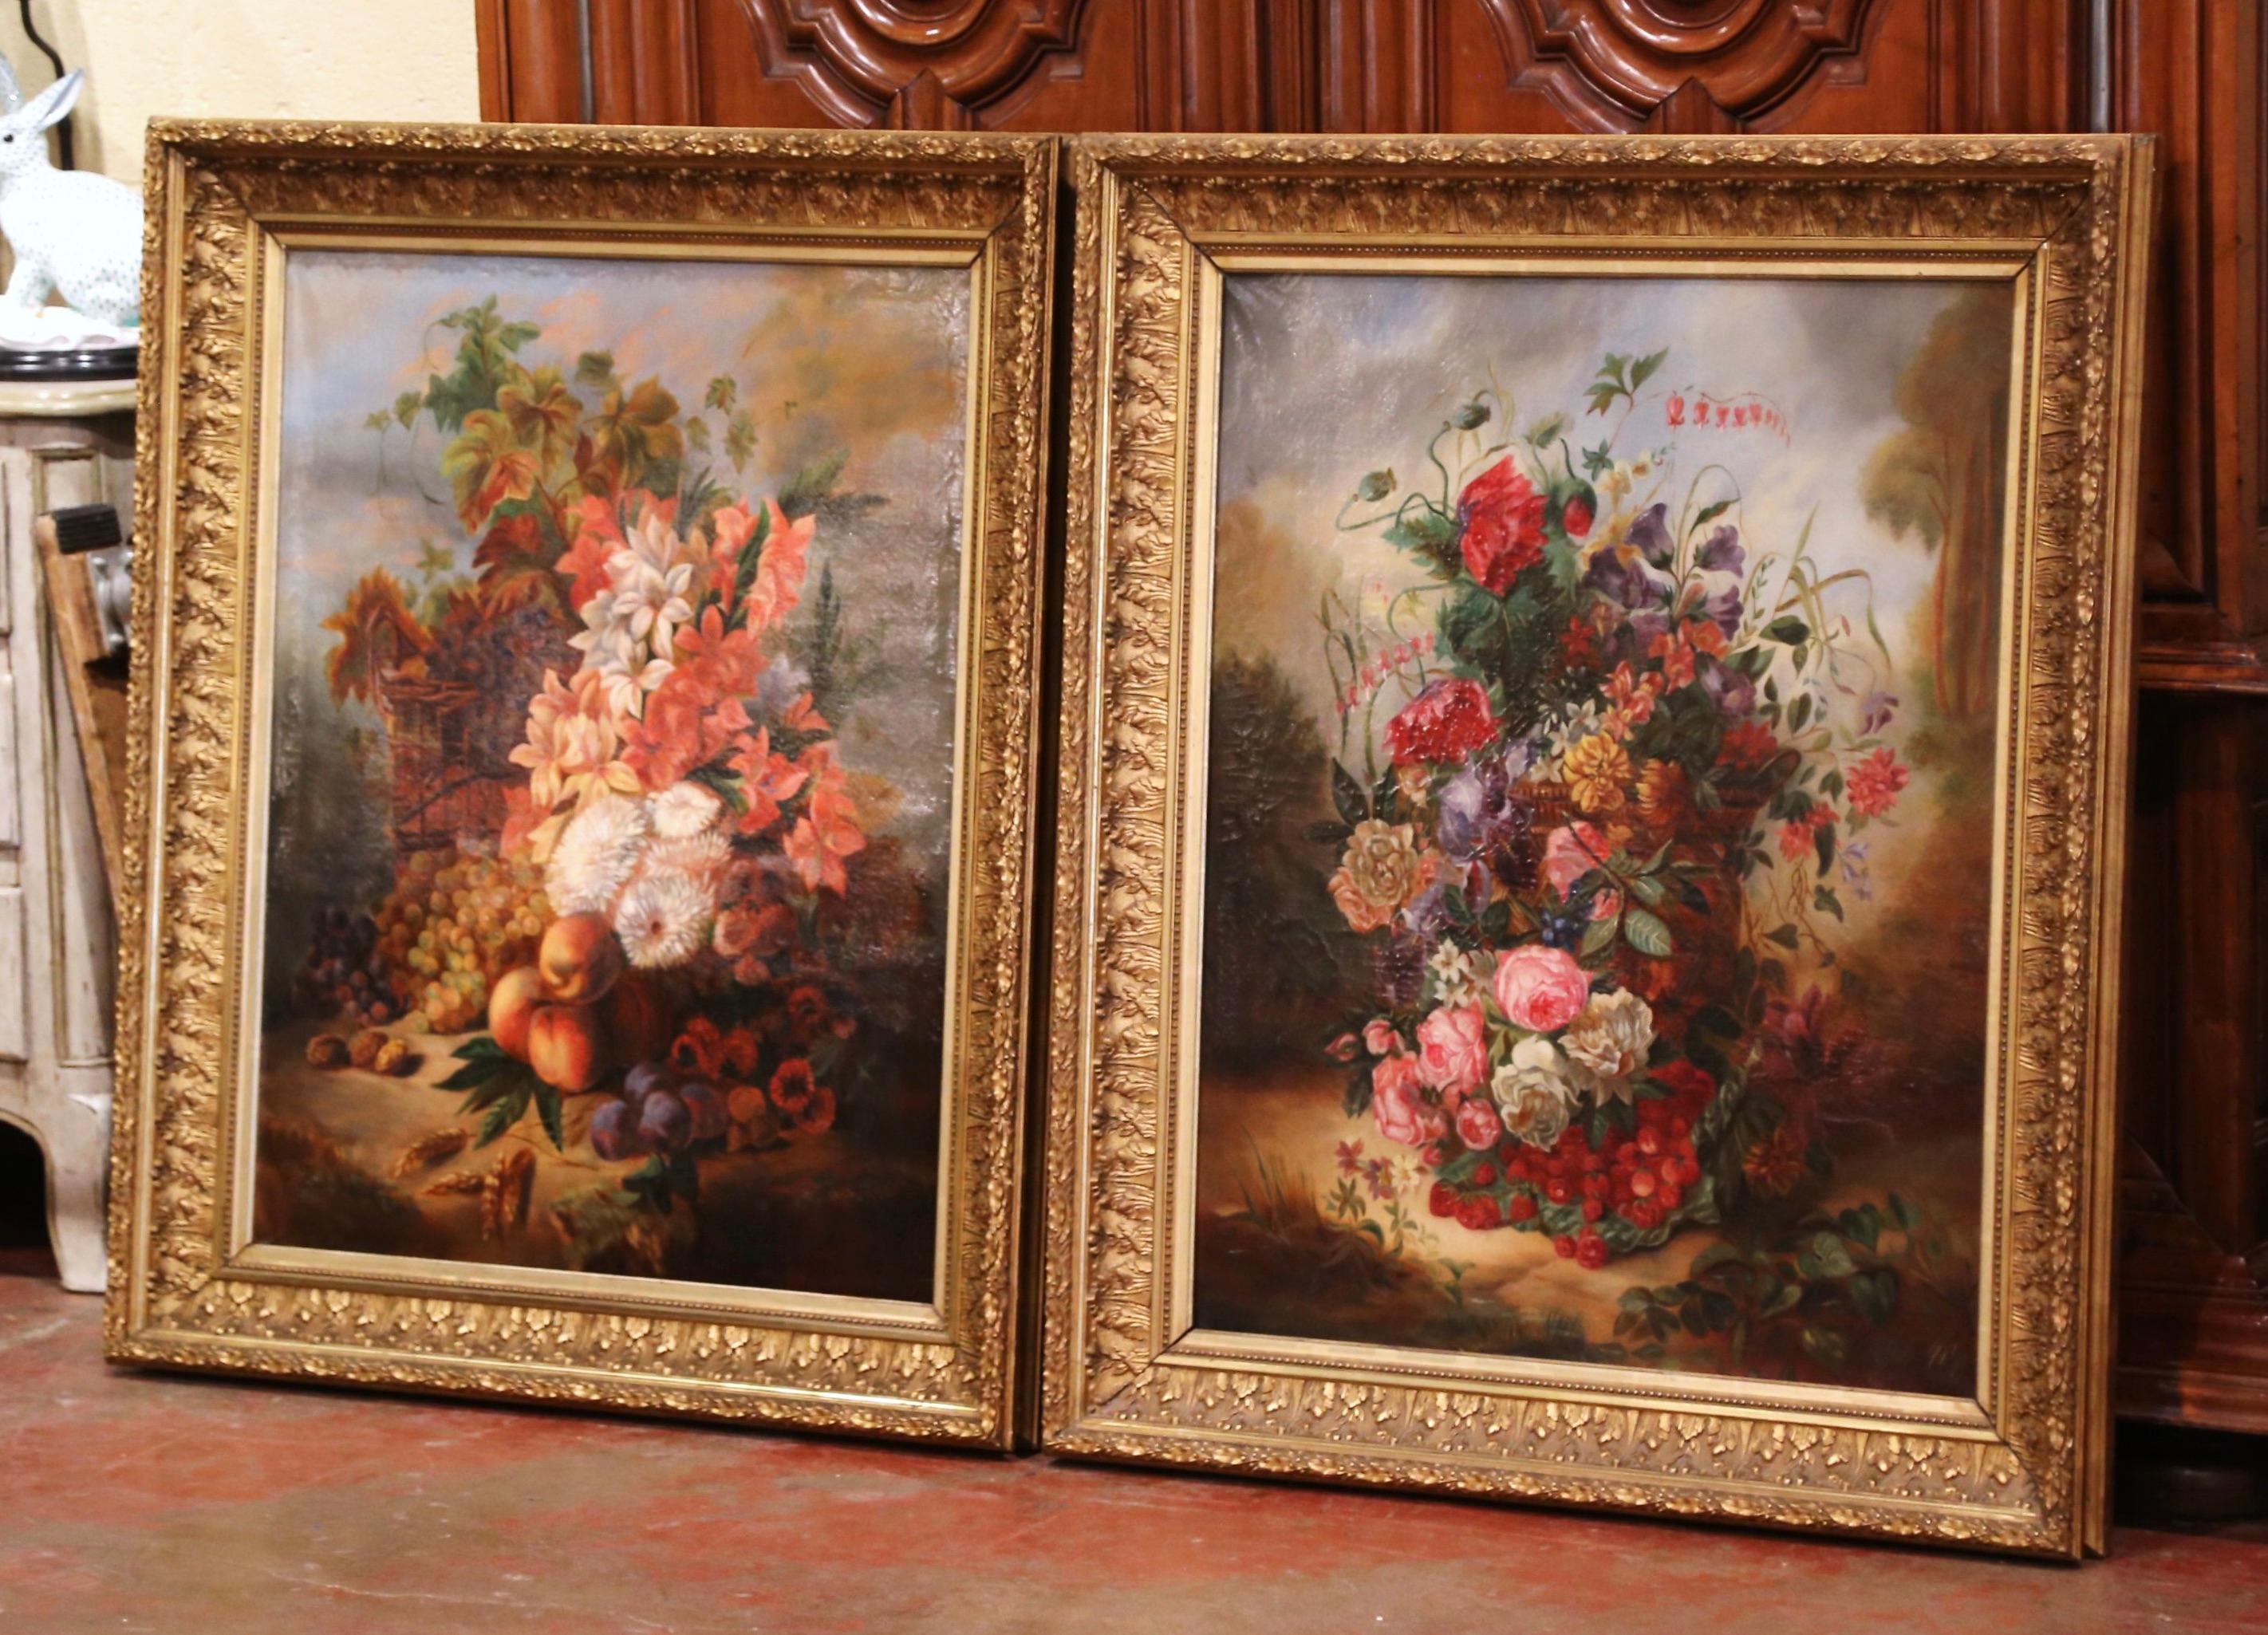 Invite color into your home with this large pair of antique, floral paintings. The artworks were crafted in France circa 1870, and are set in carved gilt frames. Each canvas features an elegant bouquet of flowers. The paintings are in excellent